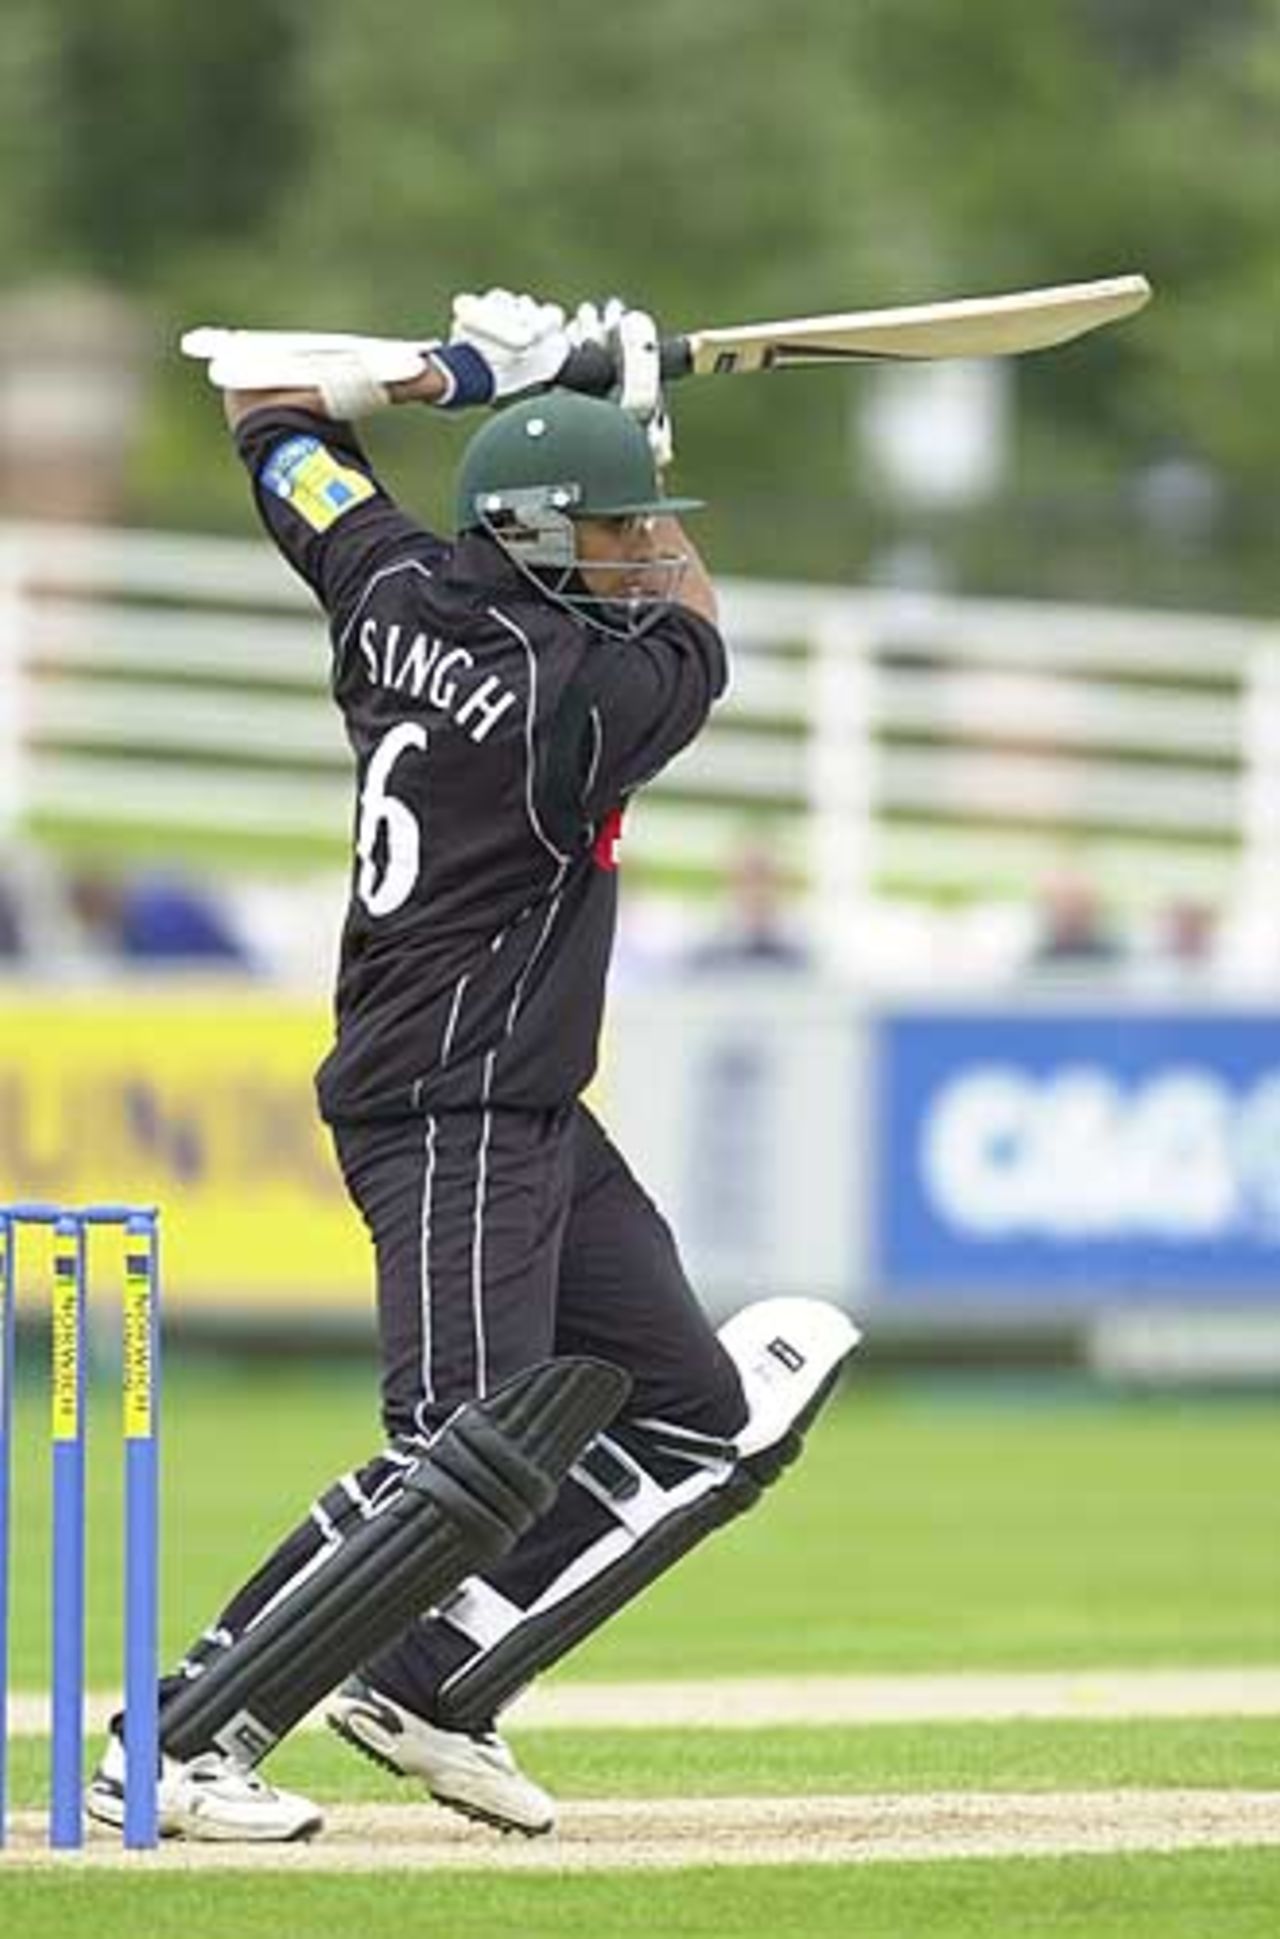 Anurag Singh with a lovely cover drive at The Riverside, Durham v Worcs, NUL 16 Jun 2002